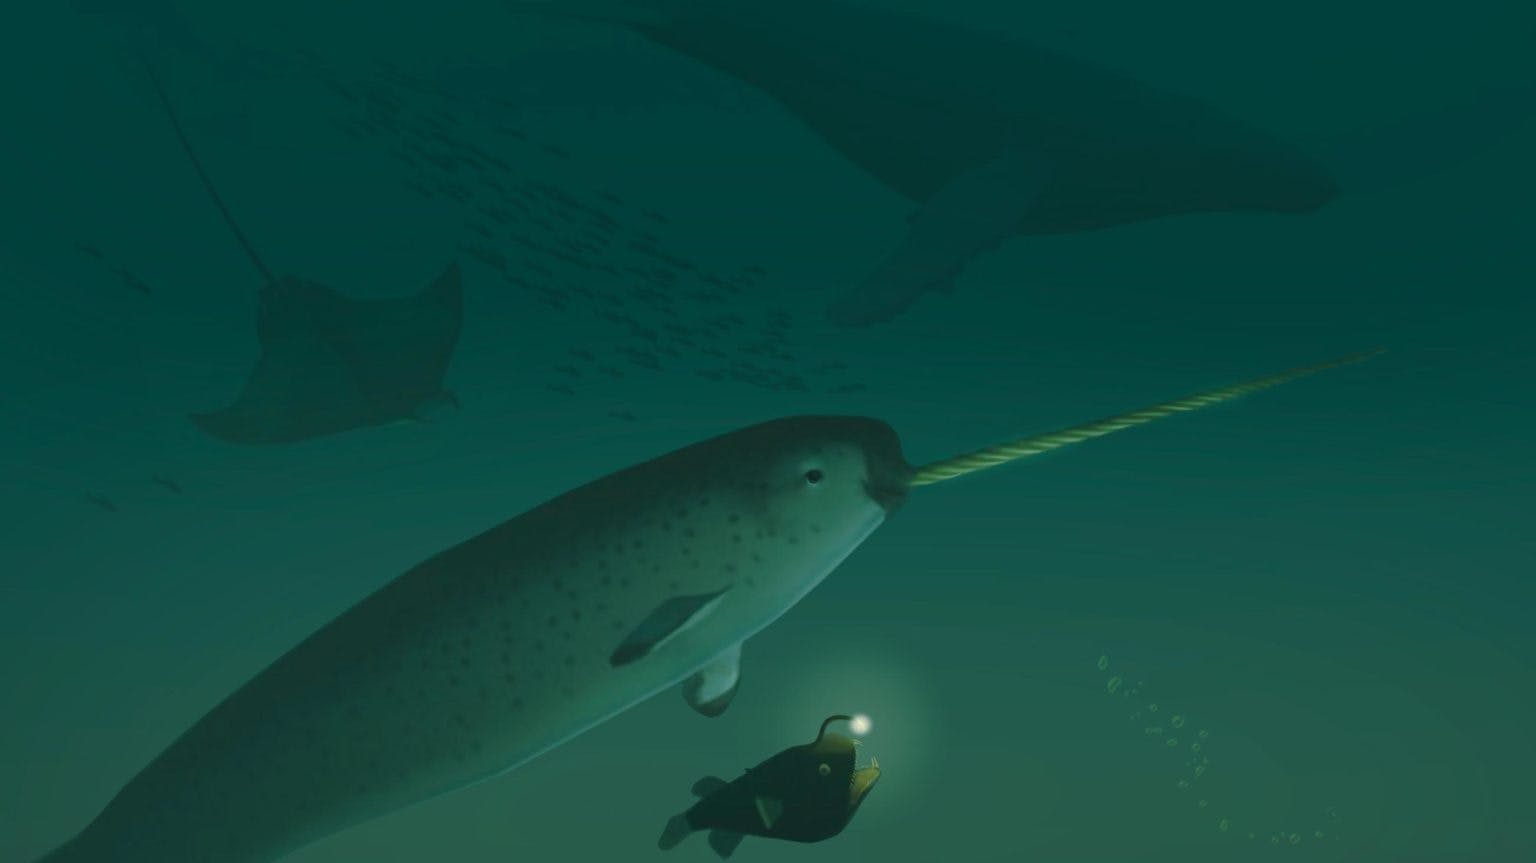 A narwhal lit by an angler fish